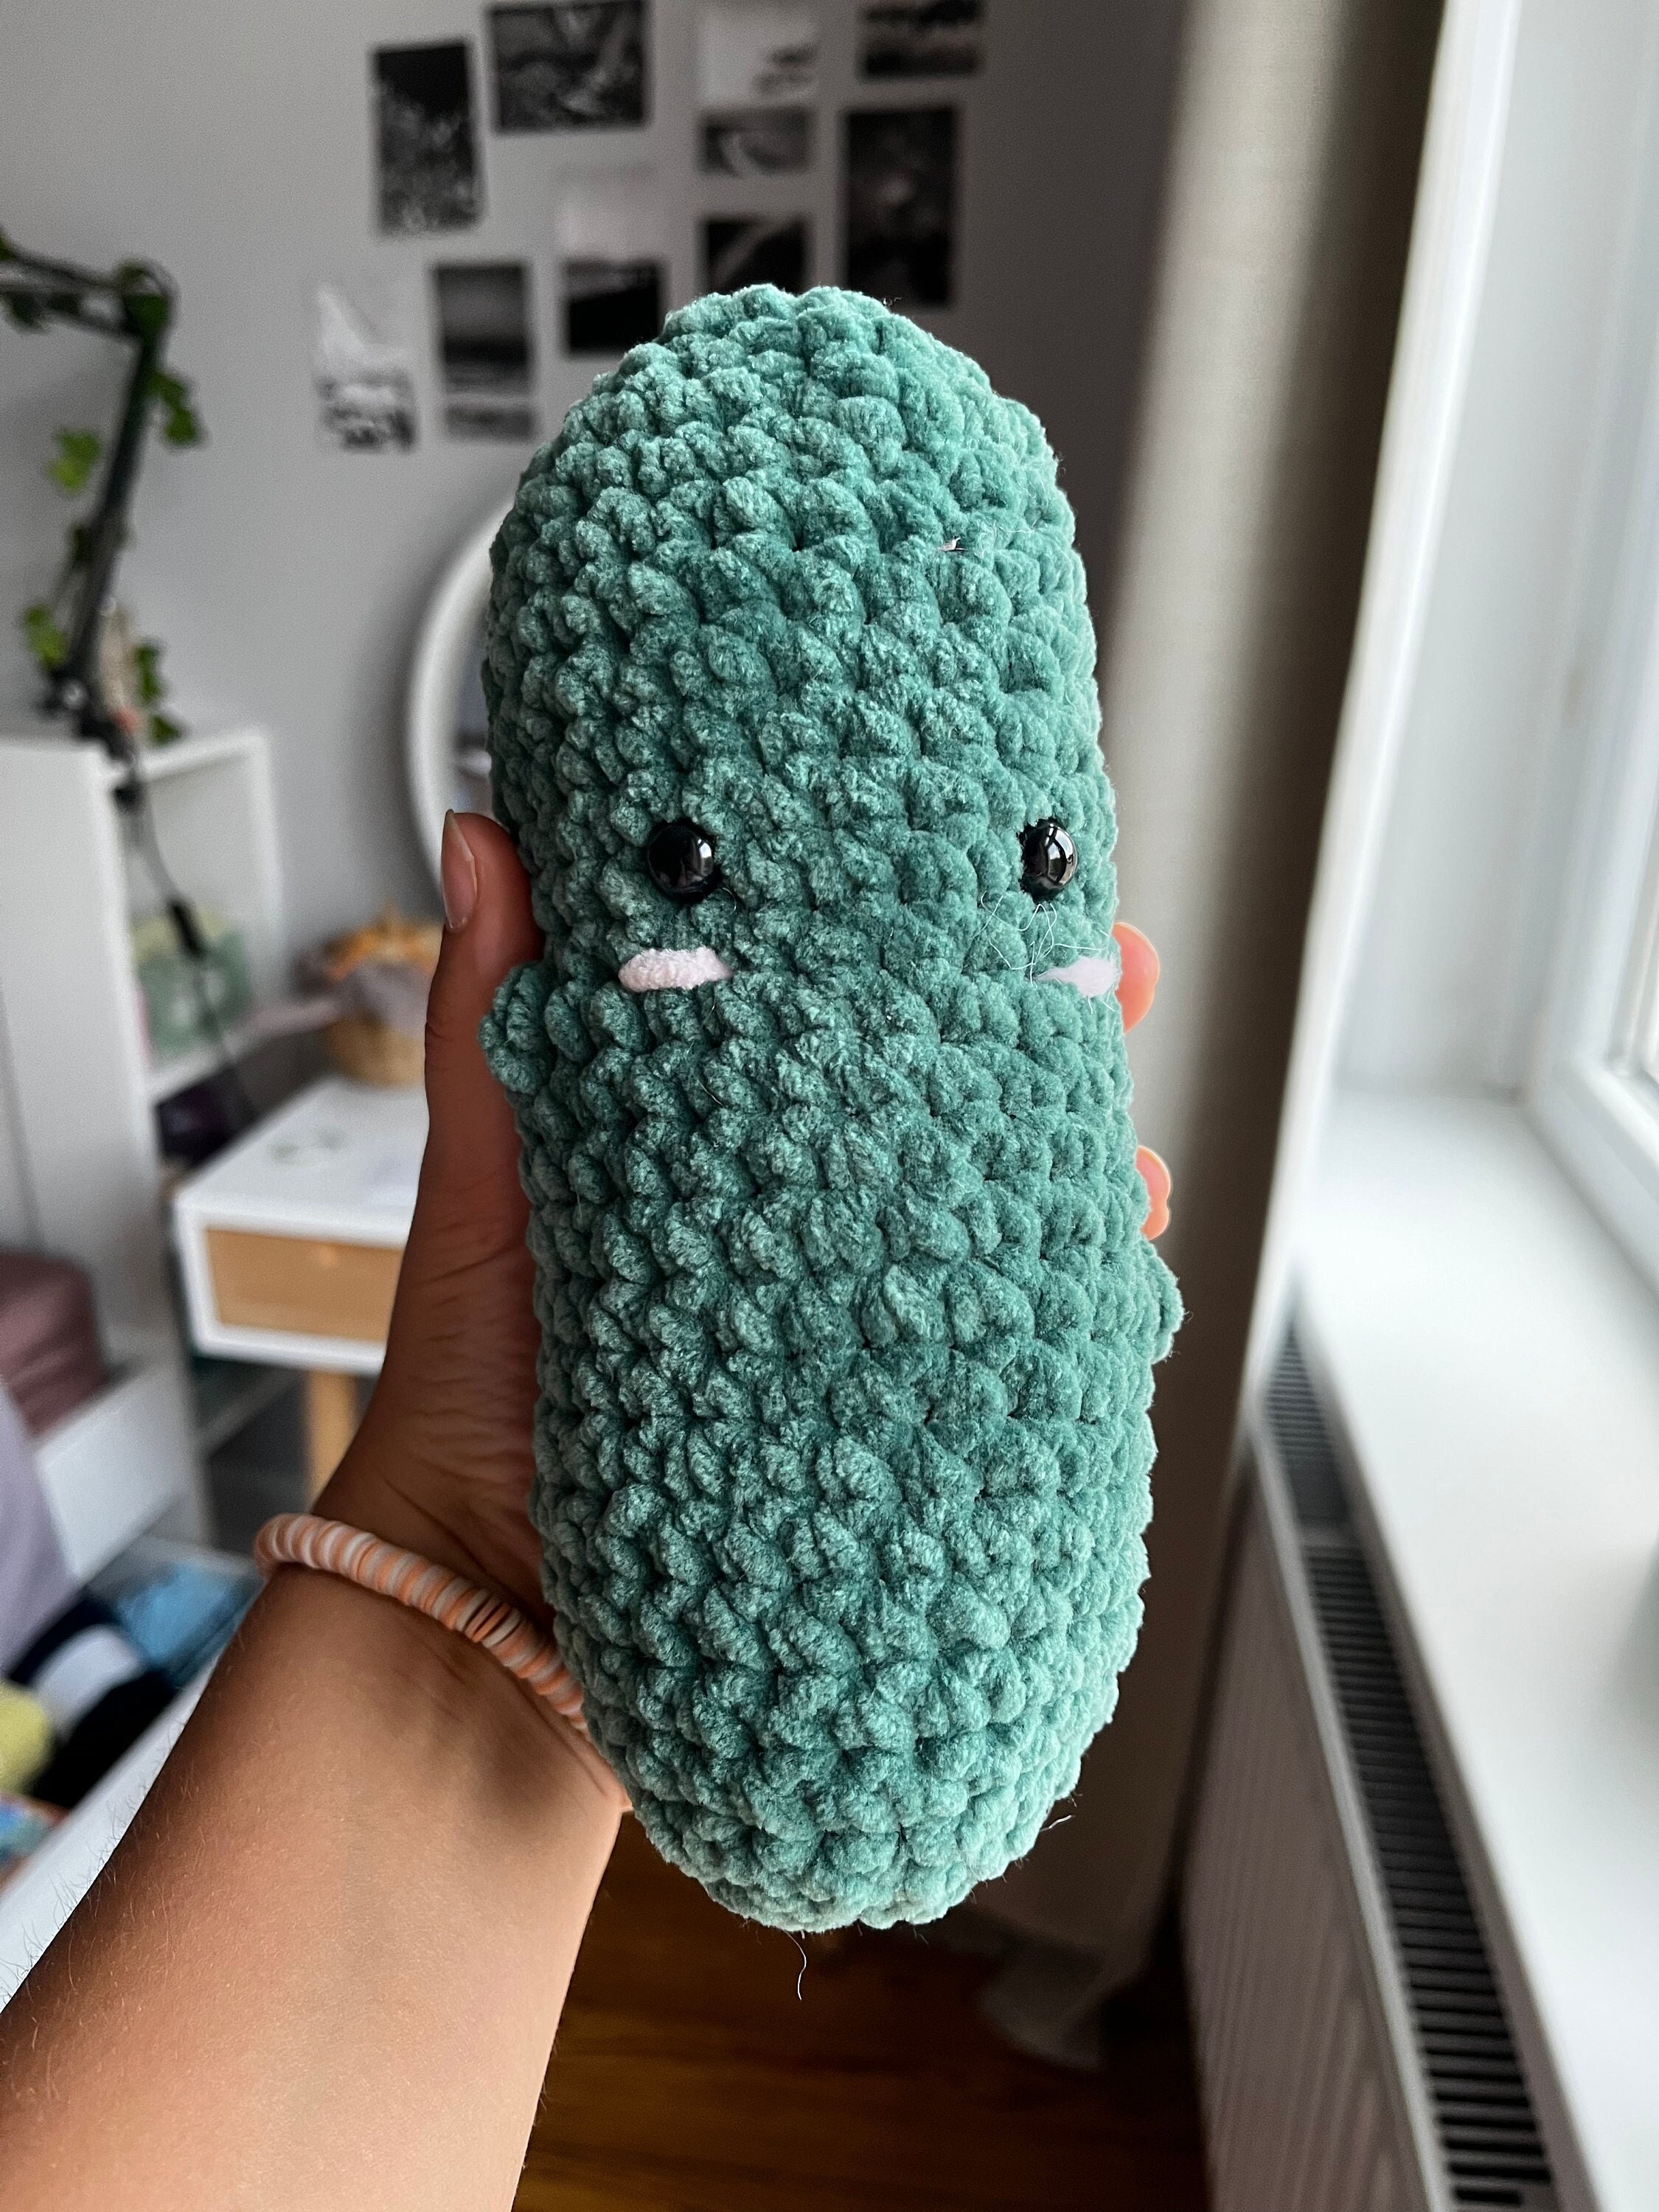 PATTERN PACK: Crochet Emotional Support Worm, Pickle, Potato